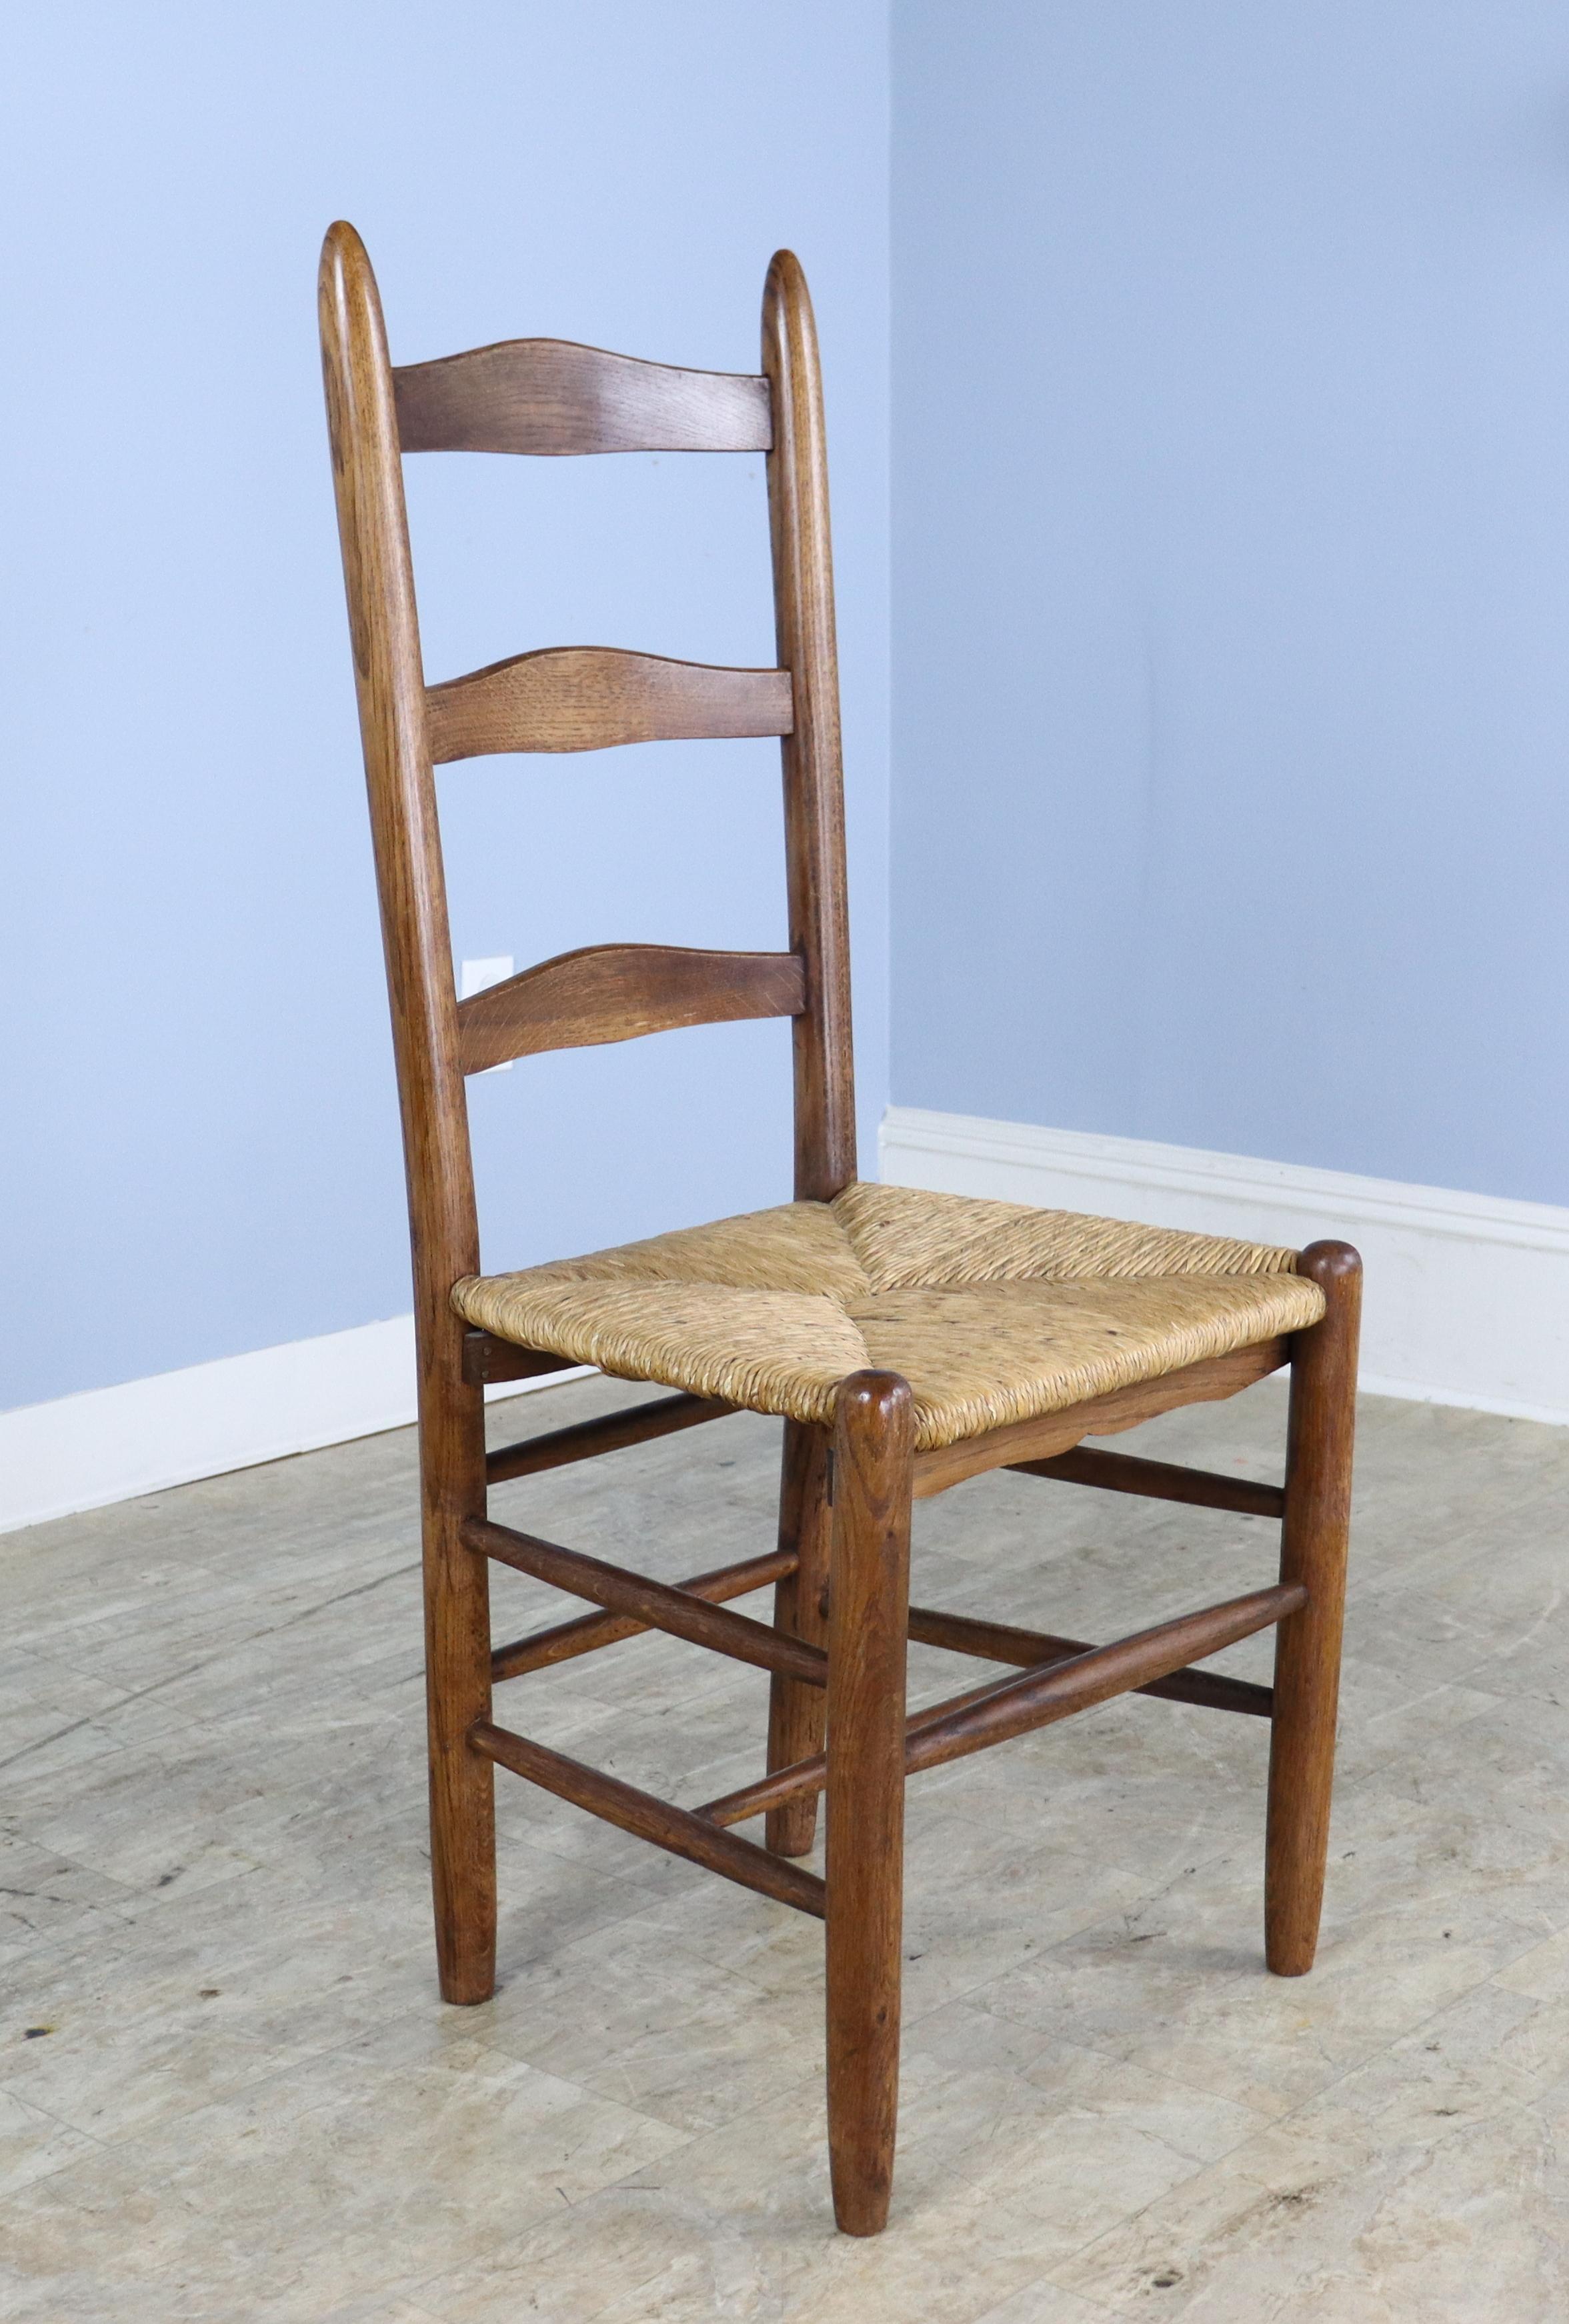 A set of 6 charming English oak ladderback chairs with their original rush seats in good condition. There is some variation in the wood color and grain, as seen in the silhouette. Although the backs of the chairs are high, the have a slight recline